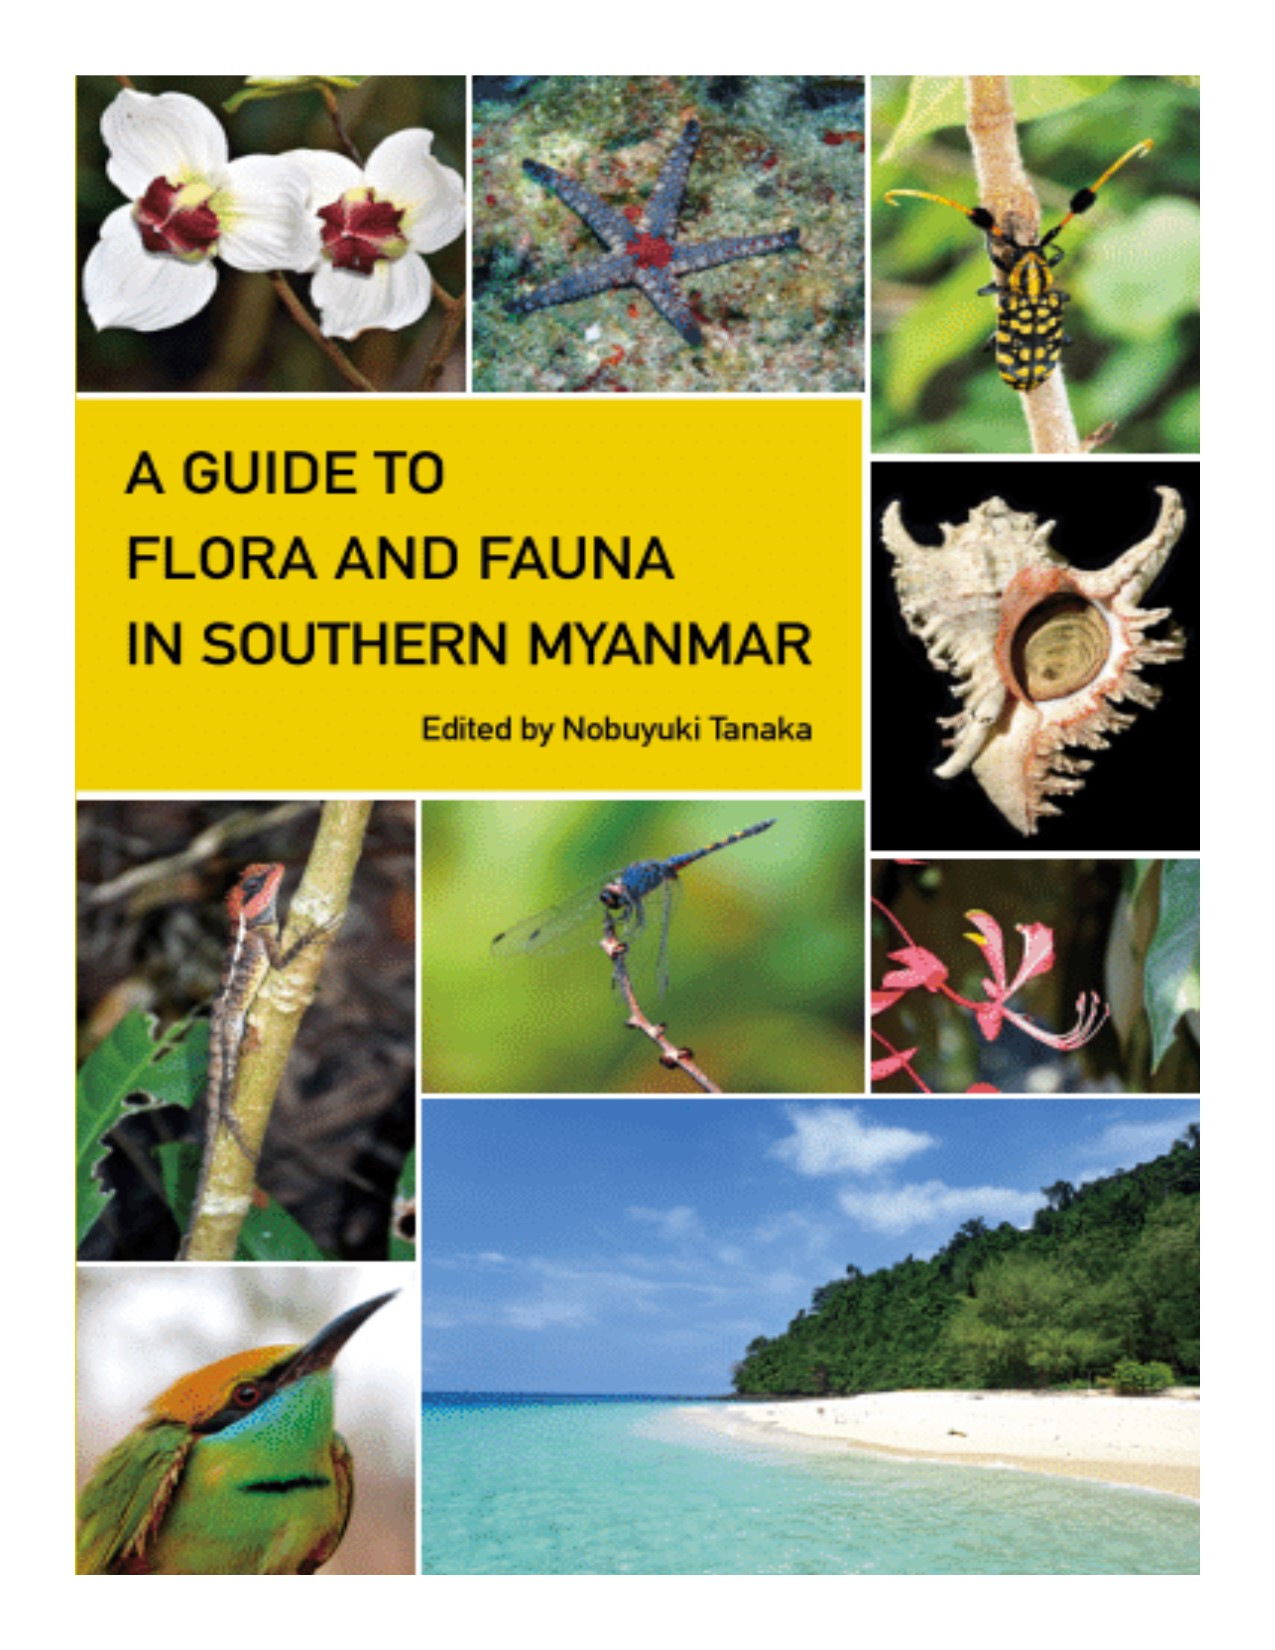 A guide to flora and fauna in southern Myanmar